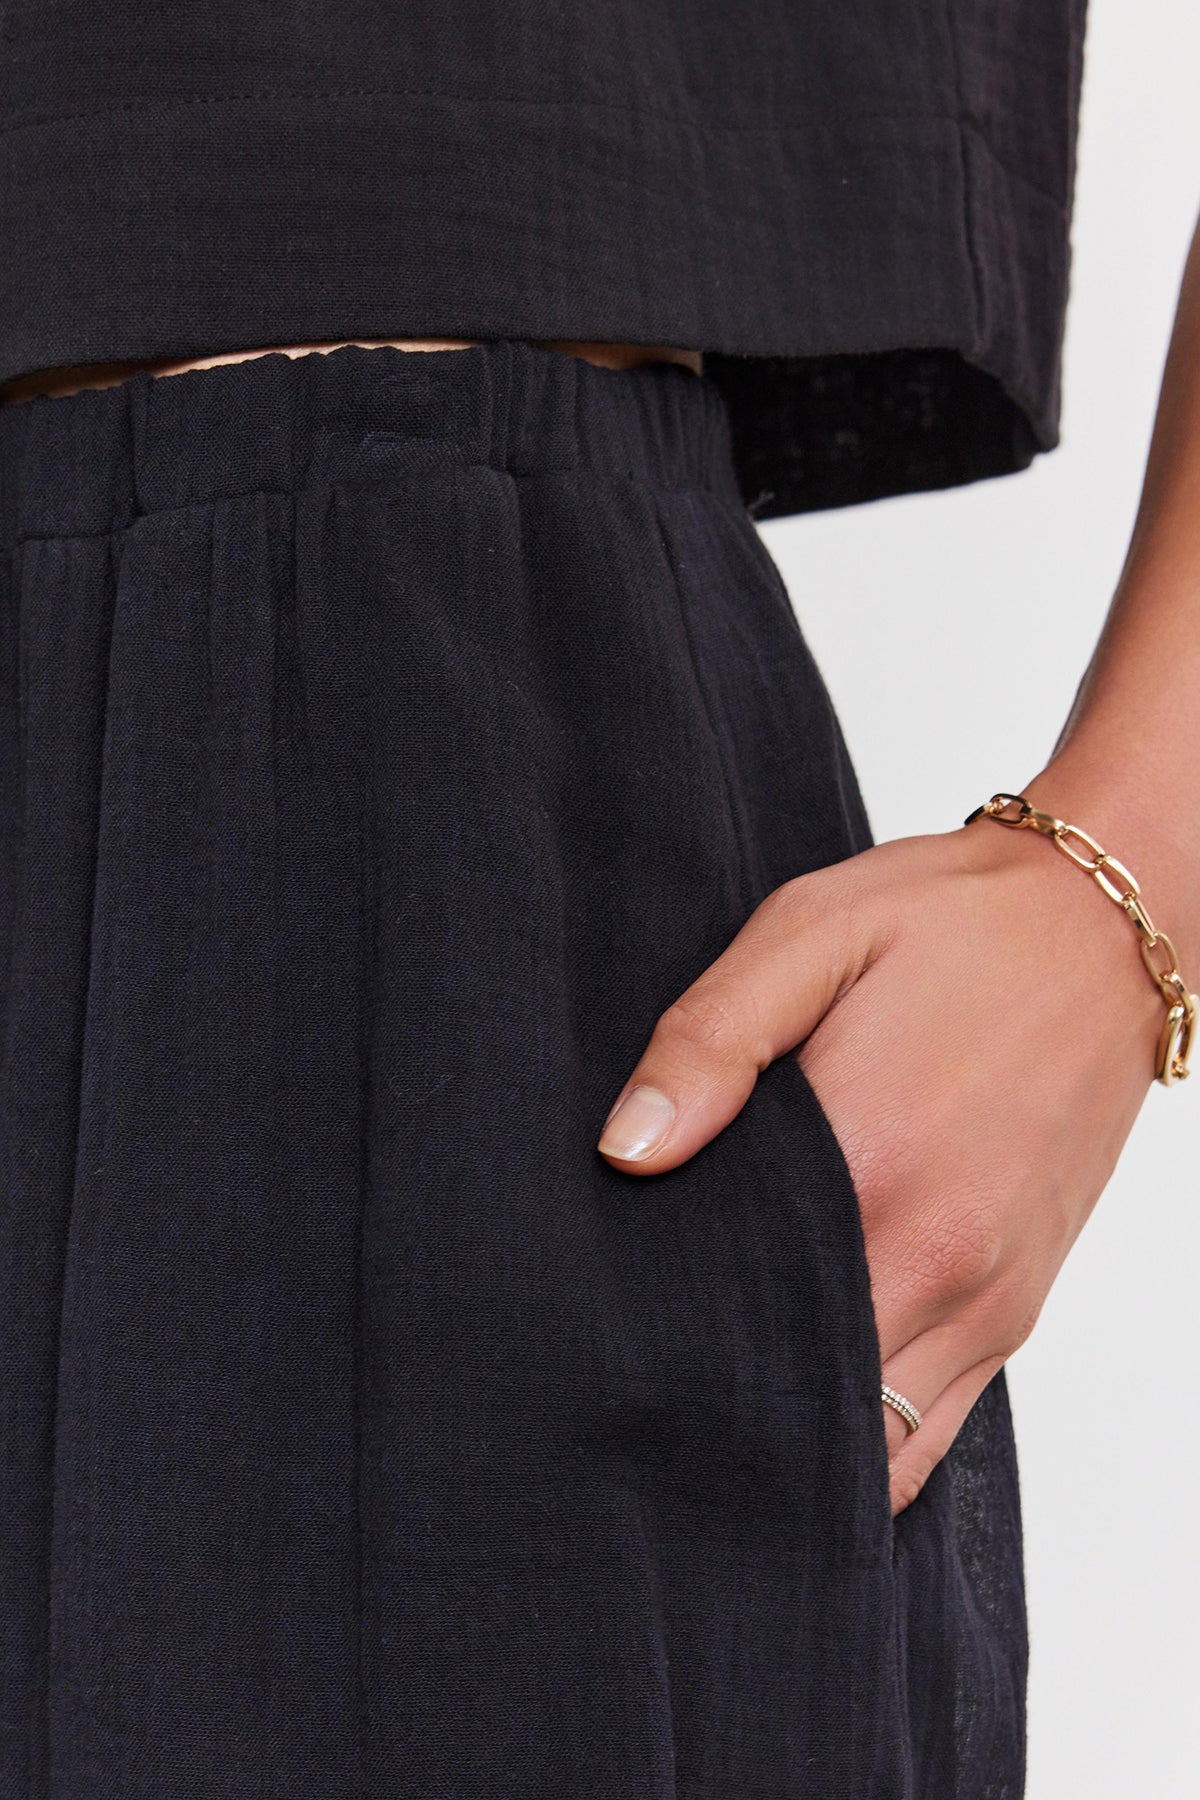 Close-up of a woman's hand with a gold bracelet and rings, resting on her Velvet by Graham & Spencer INDY COTTON GAUZE SKIRT.-36910123679937